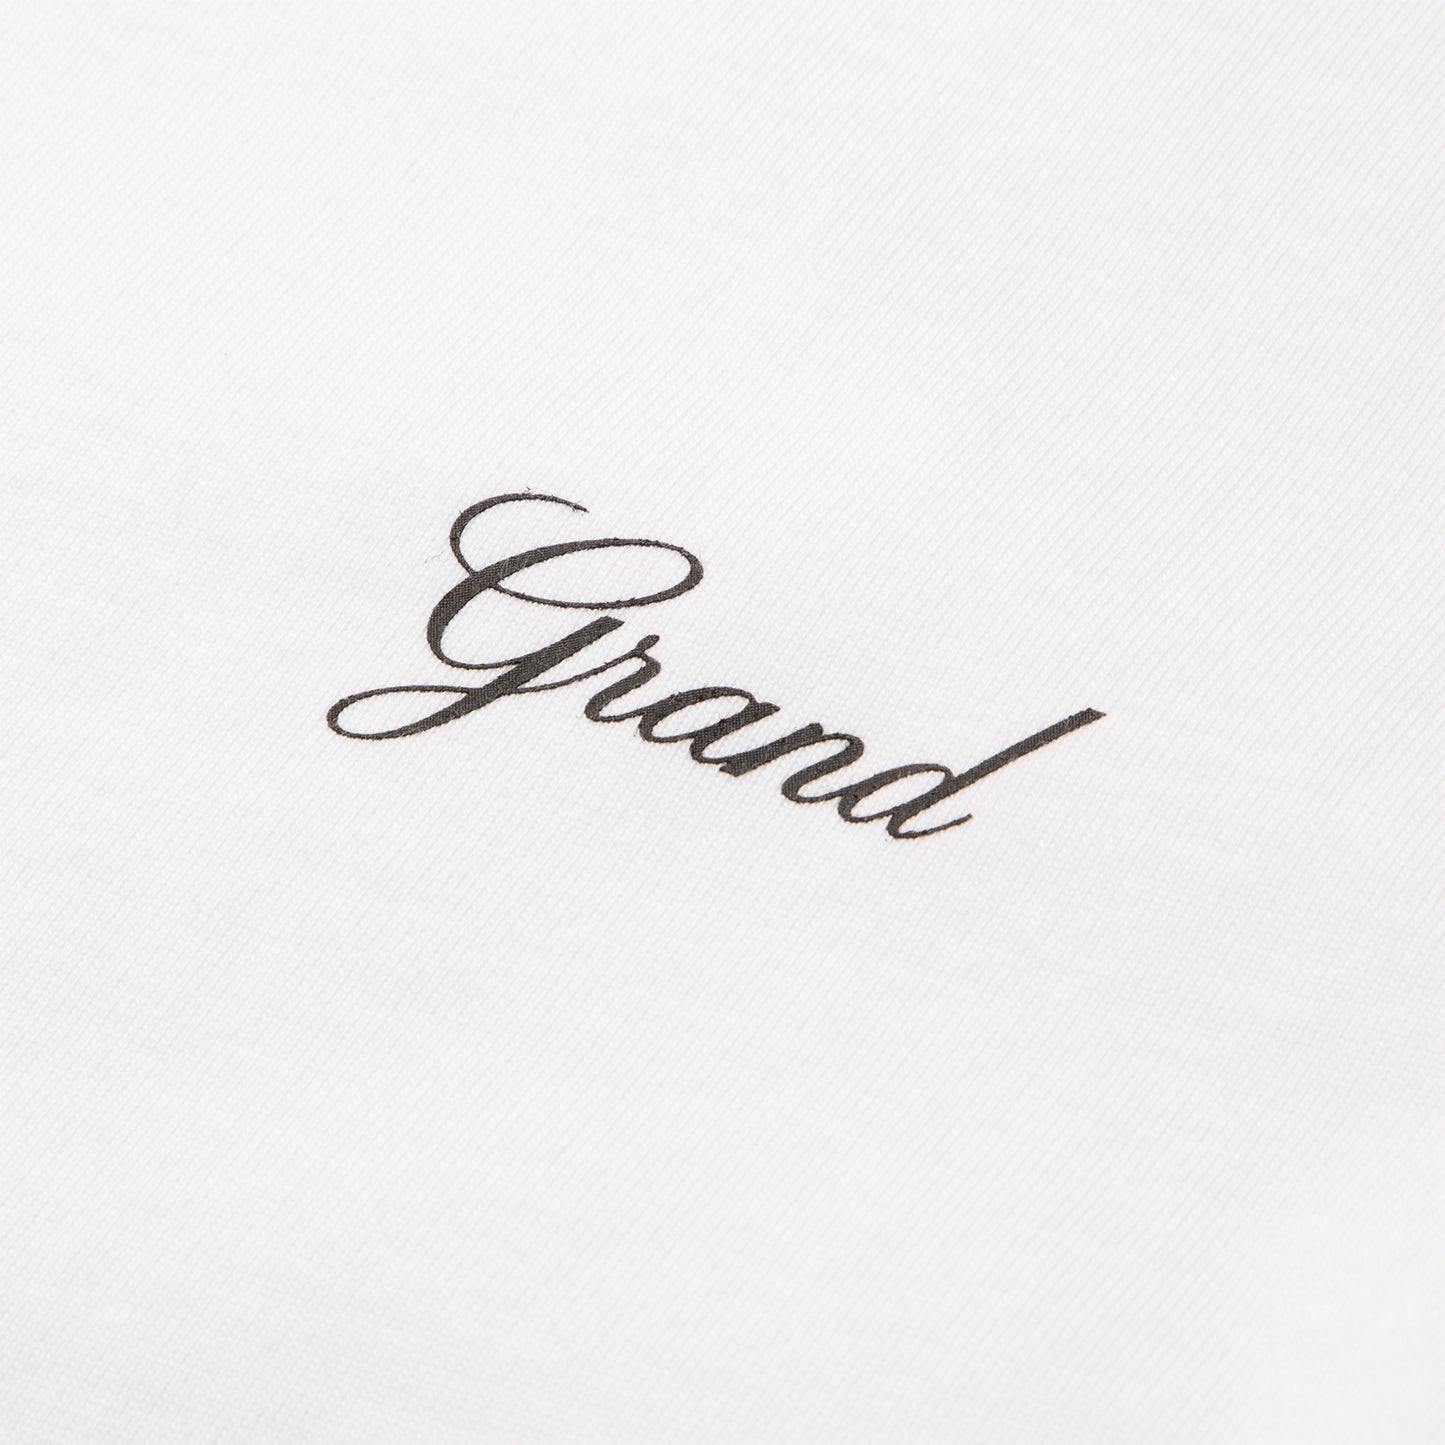 Grand Collection Script Tee (White) – CNCPTS